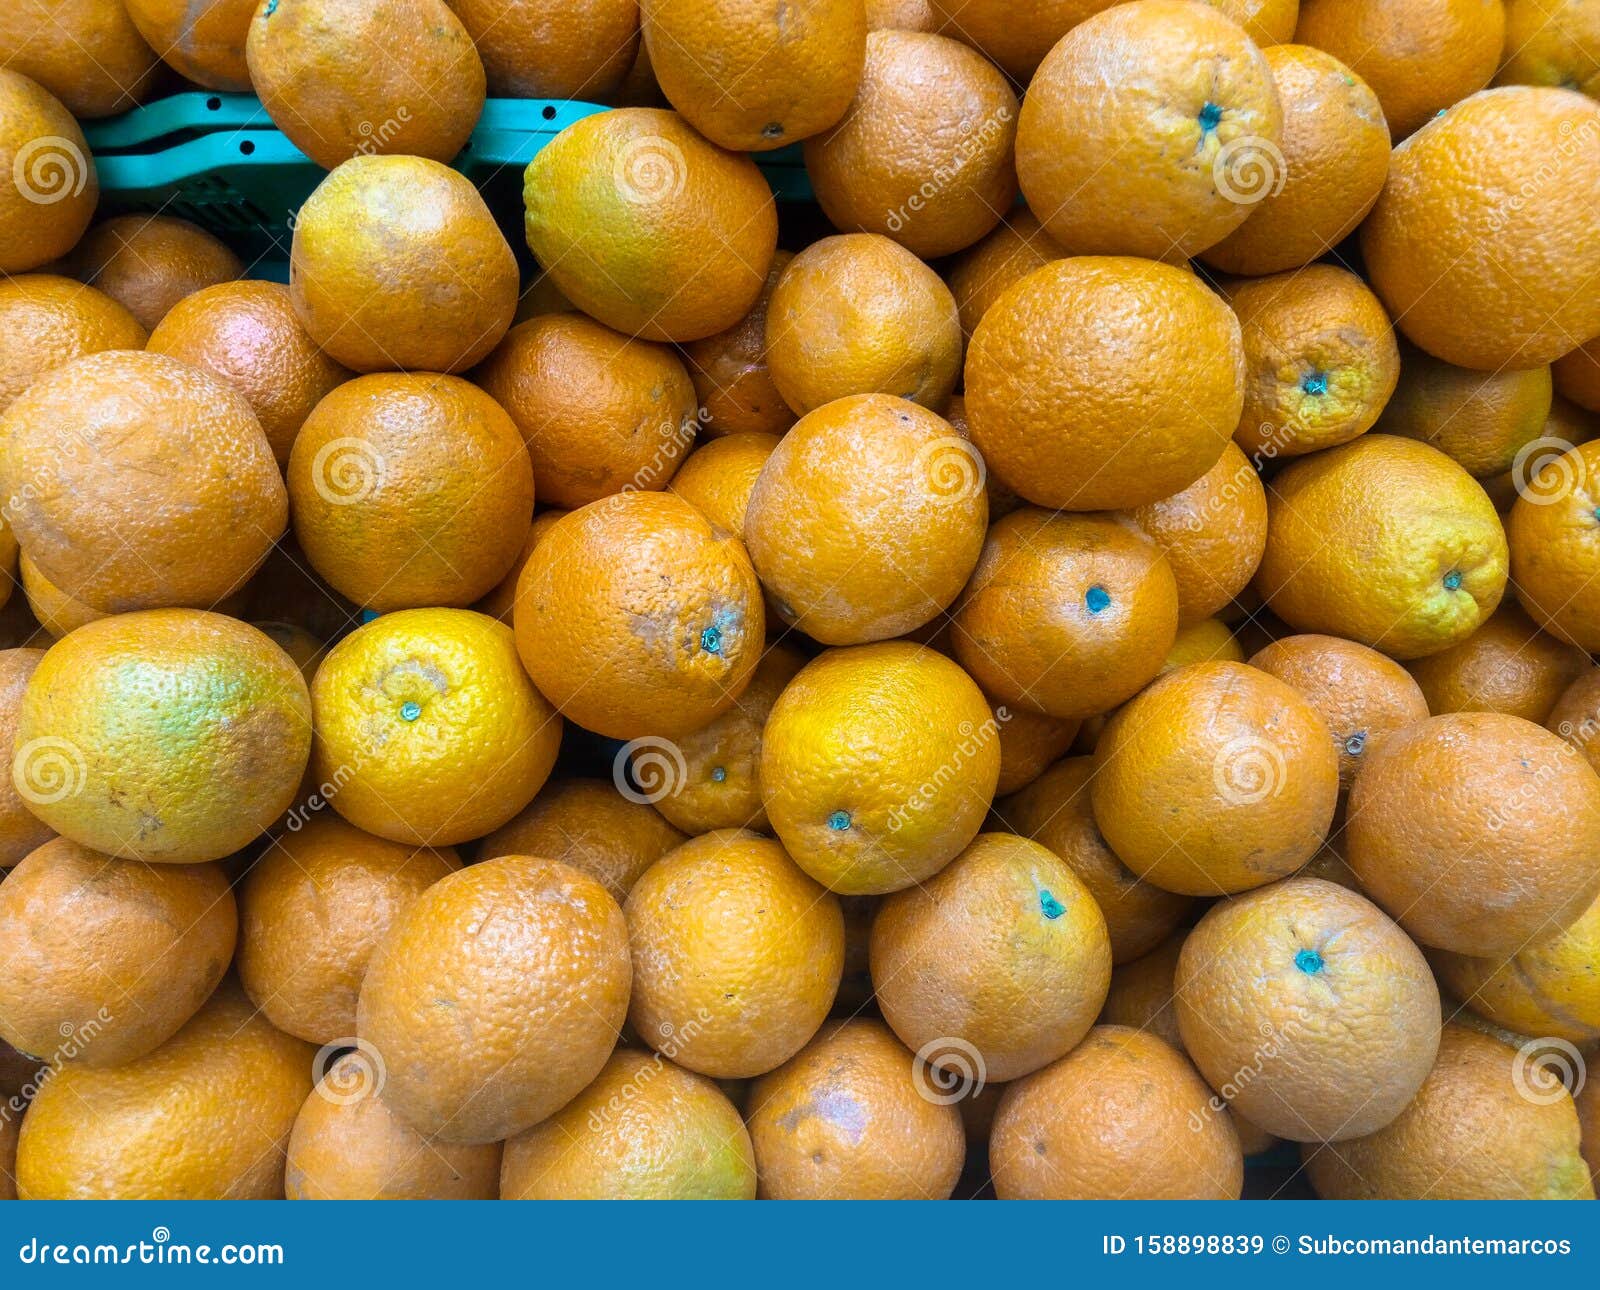 Delicious Juicy Ripe Oranges On The Supermarket Counter Stock Image